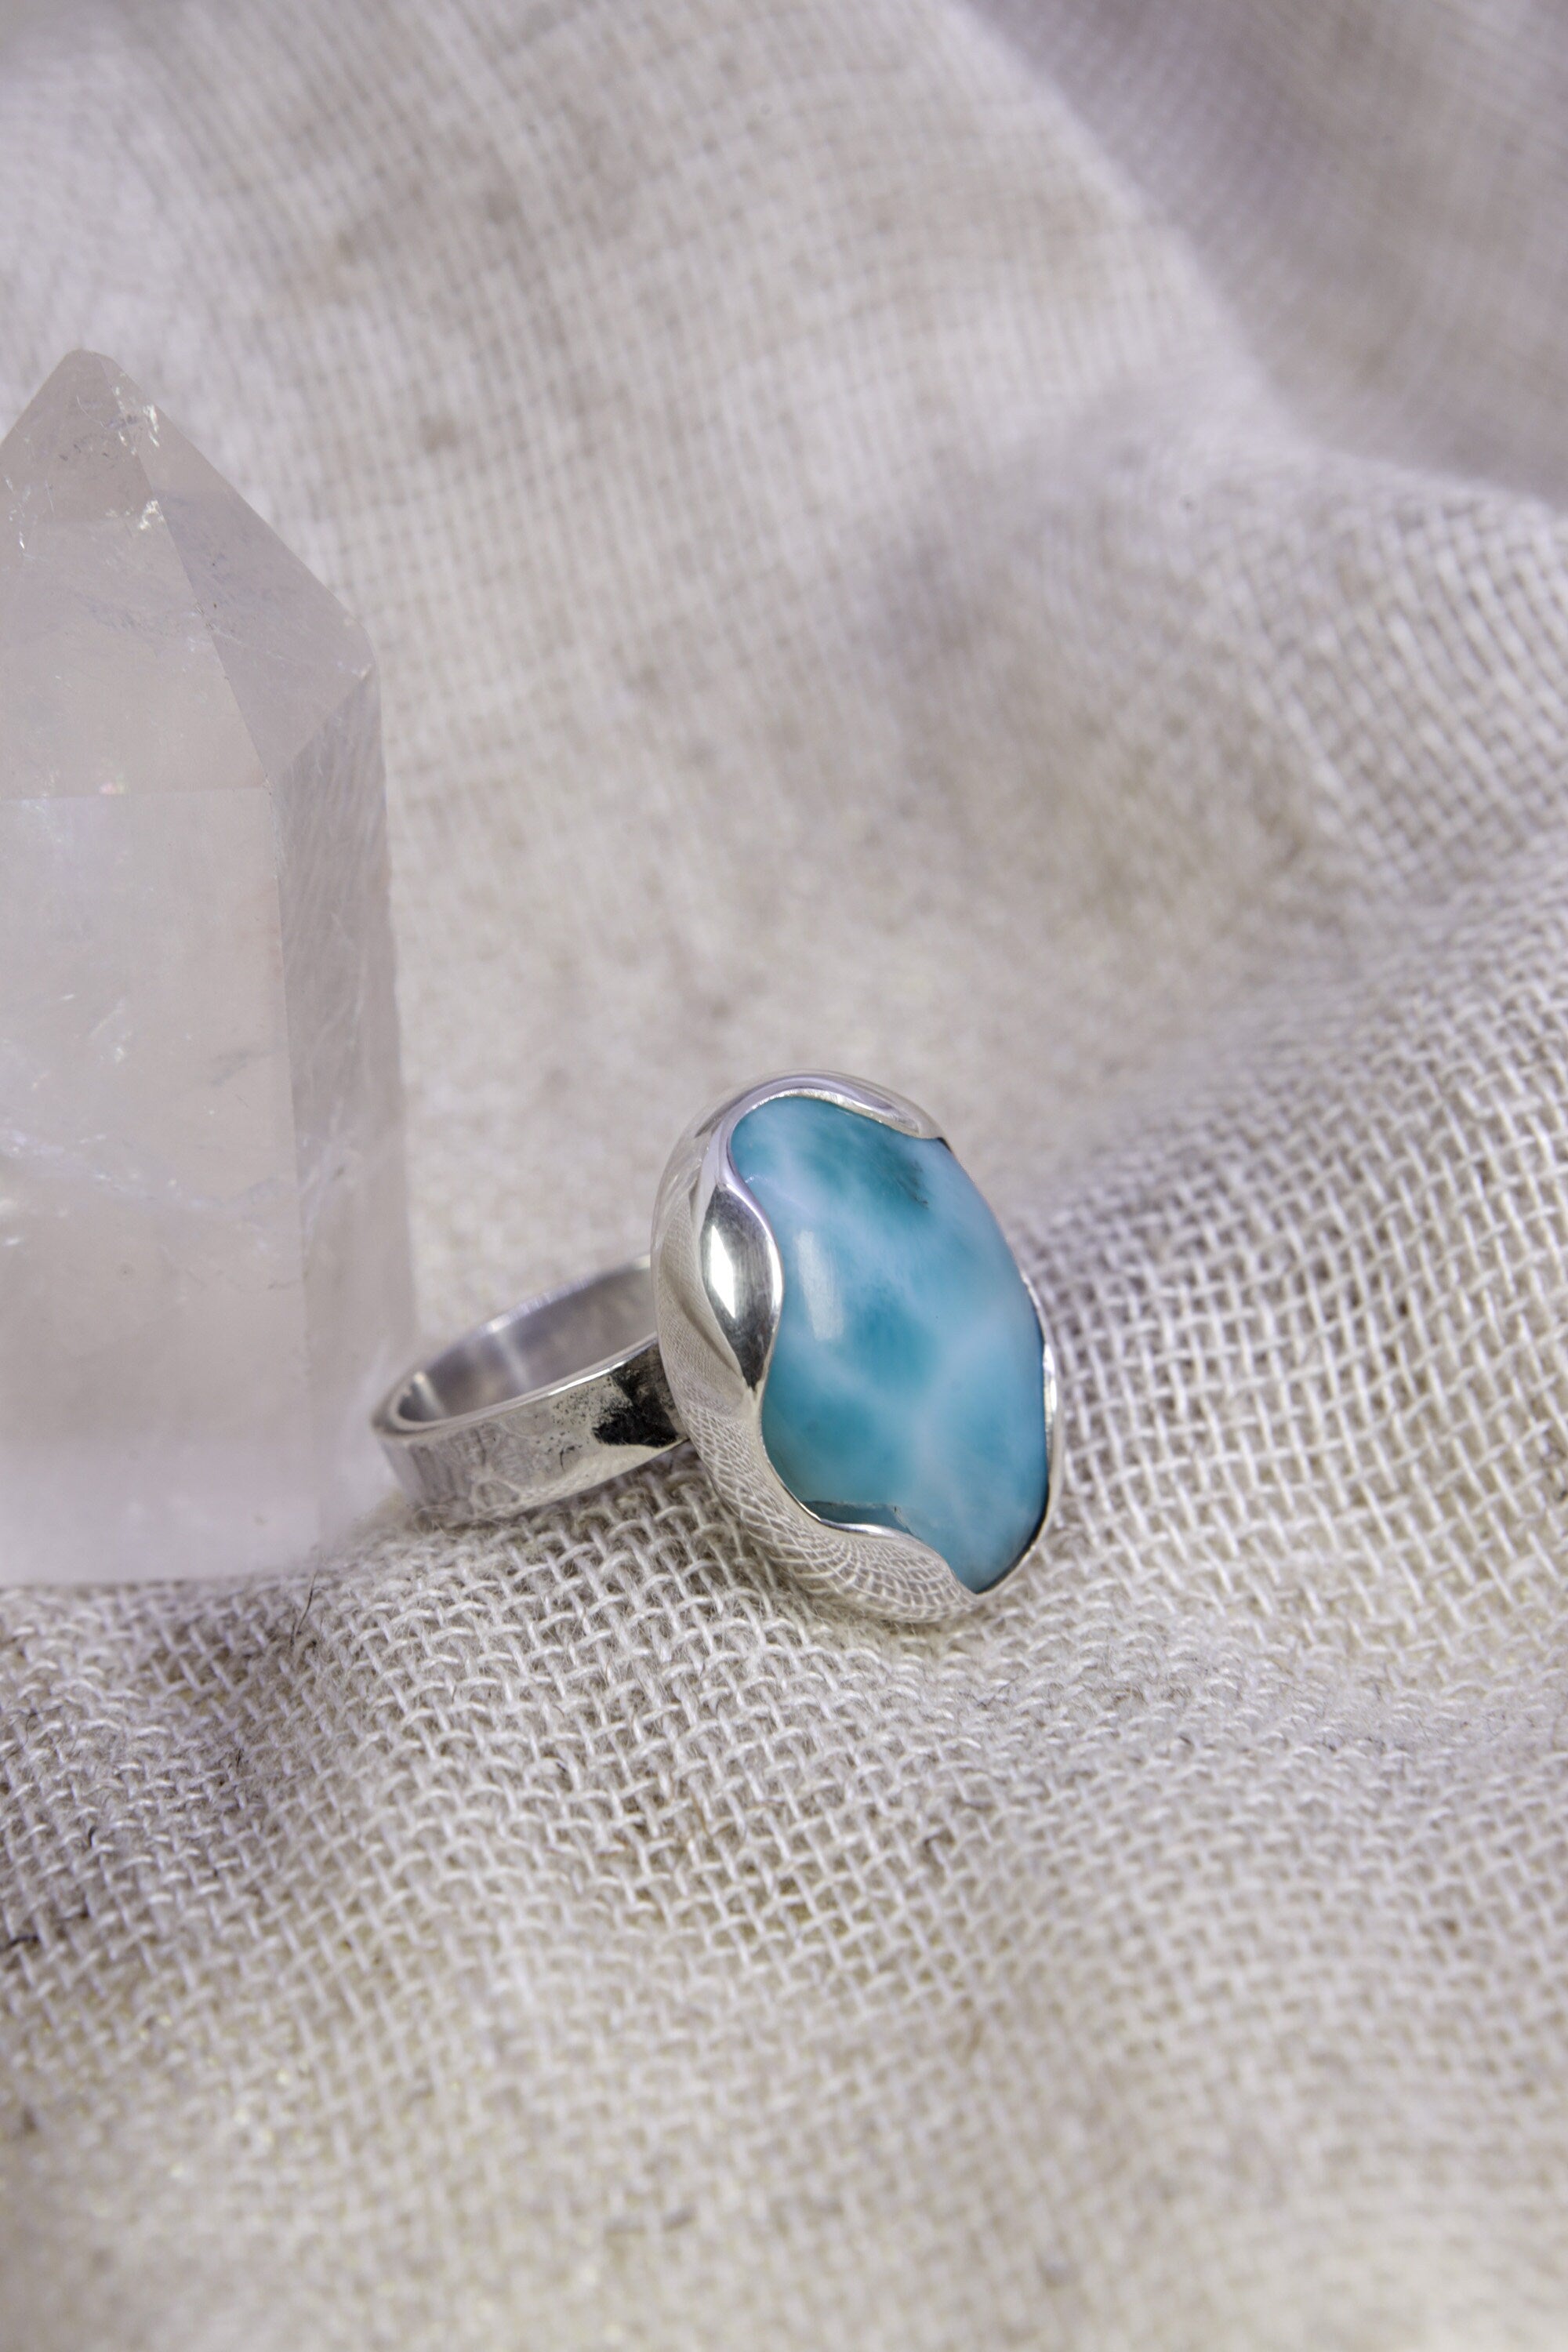 A Tribute to Oceanic Splendor: Adjustable Sterling Silver Ring with Oval Larimar - Unisex - Size 5-12 US - NO/01